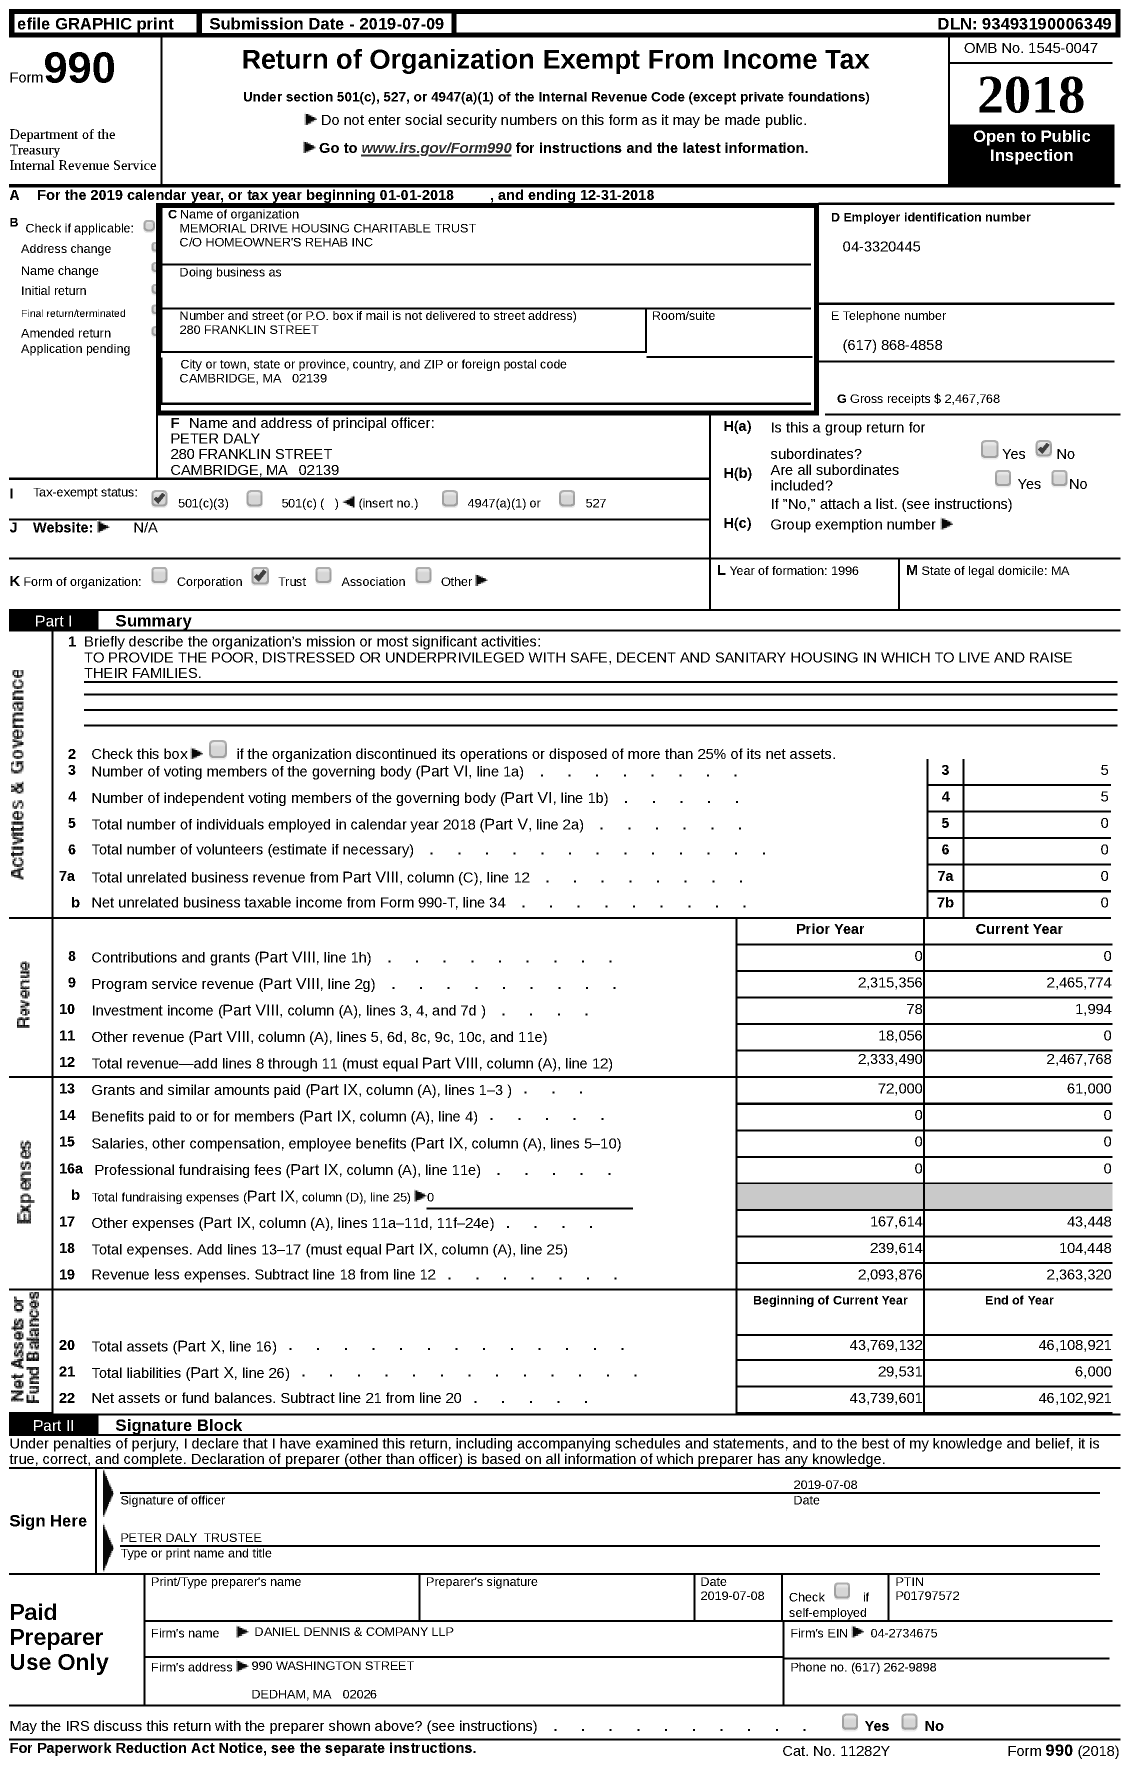 Image of first page of 2018 Form 990 for Memorial Drive Housing Charitable Trust